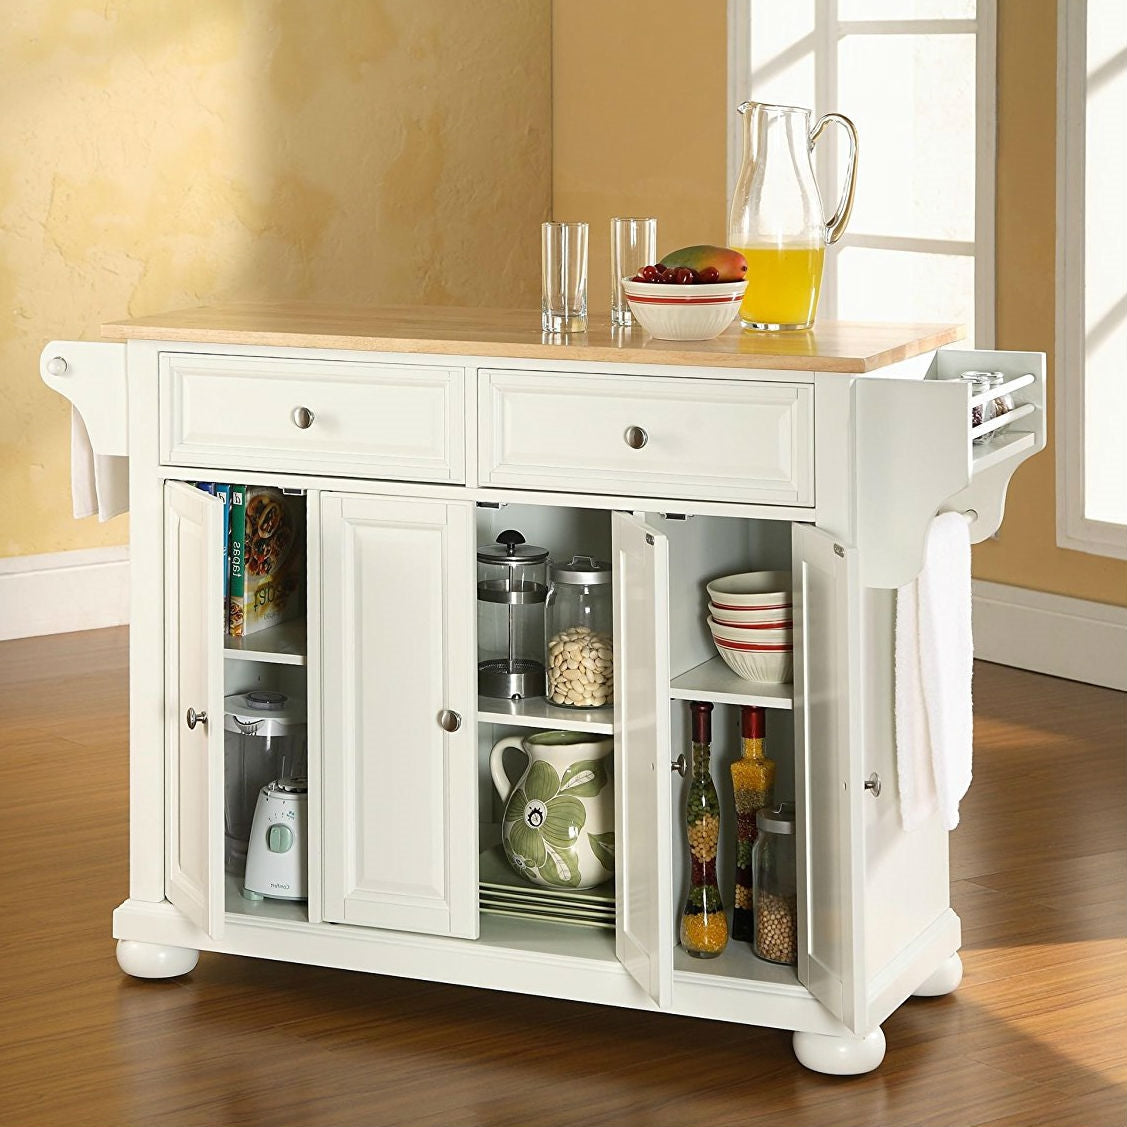 Kitchen > Utility Tables & Workbenches - White Kitchen Island Storage Cabinet With Solid Wood Top